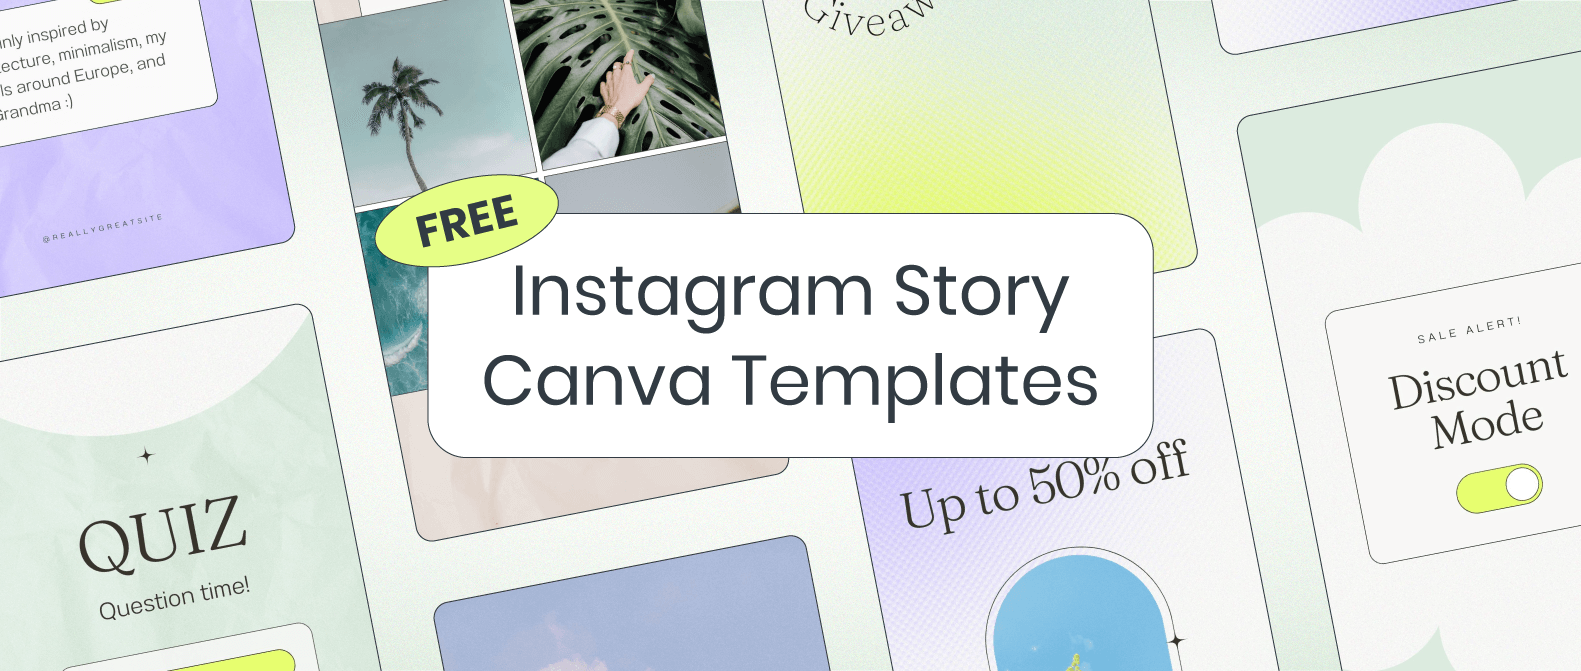 Decorative header for Later’s free instagram story canva templates